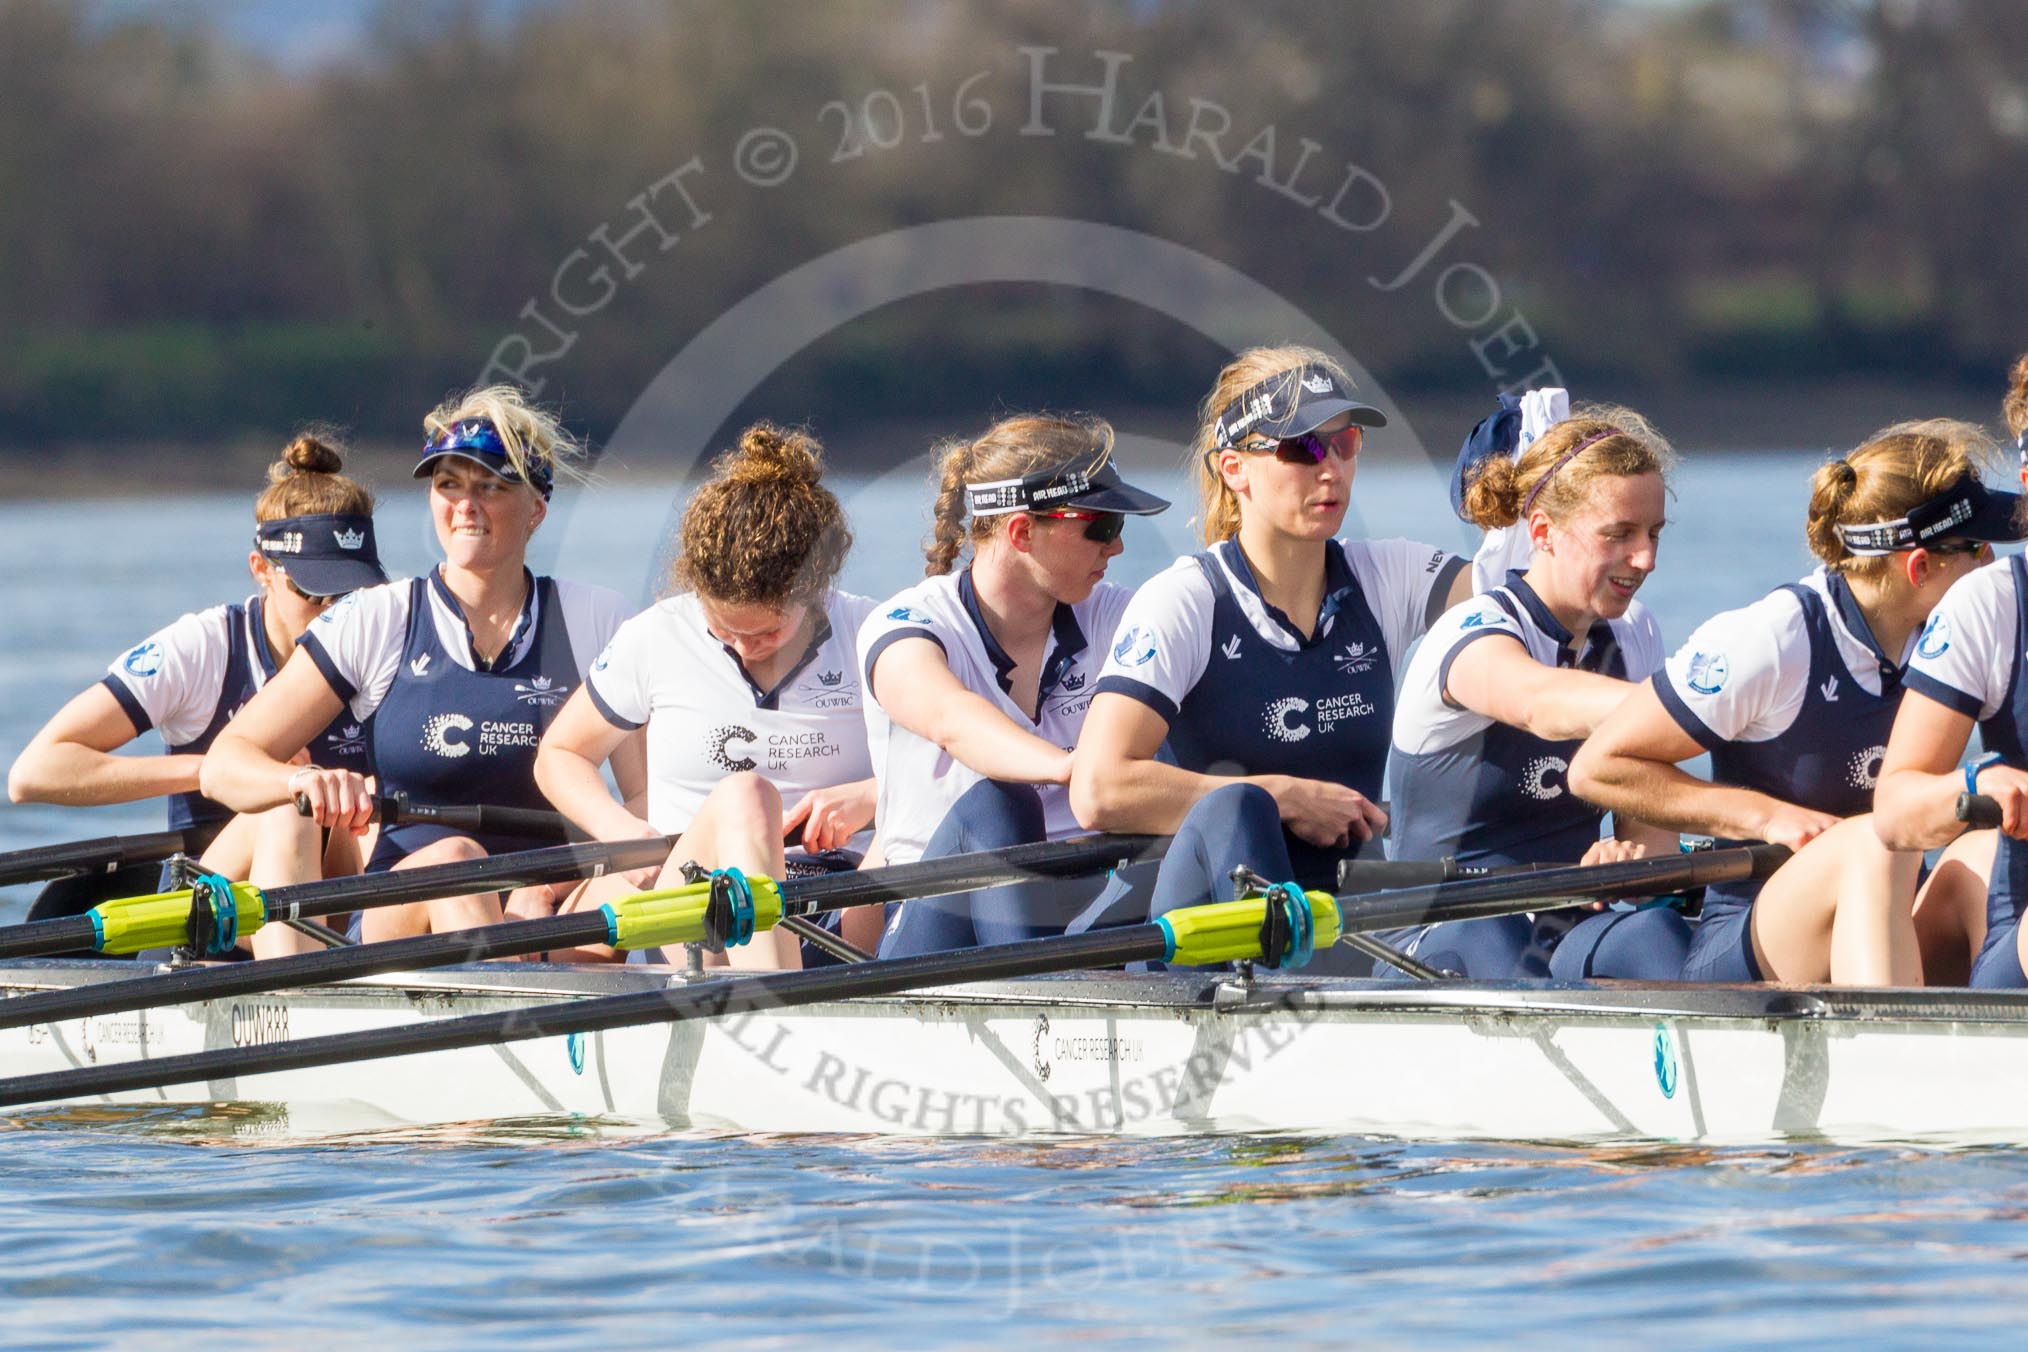 The Boat Race season 2016 -  The Cancer Research Women's Boat Race.
River Thames between Putney Bridge and Mortlake,
London SW15,

United Kingdom,
on 27 March 2016 at 14:04, image #143